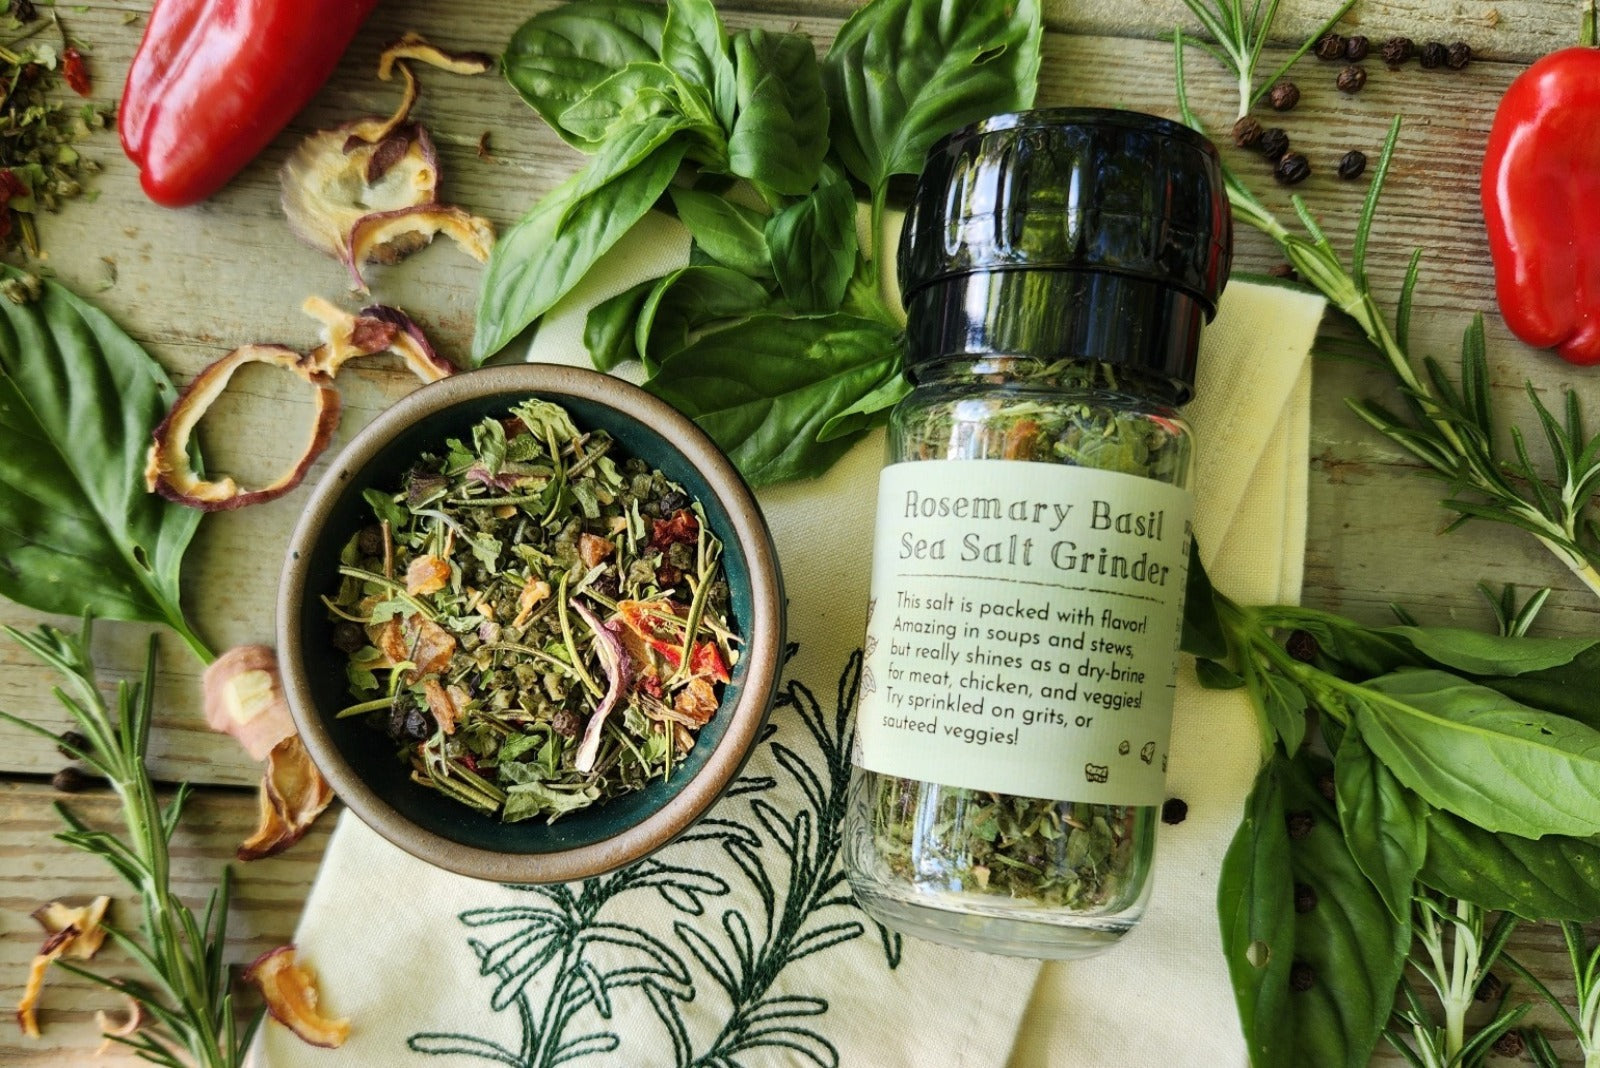 A glass grinder jar of Rosemary Basil Sea Salt from Well Seasoned Table on a wooden background with a ceramic bowl of seasoning, peppers, rosemary, and basil around it.